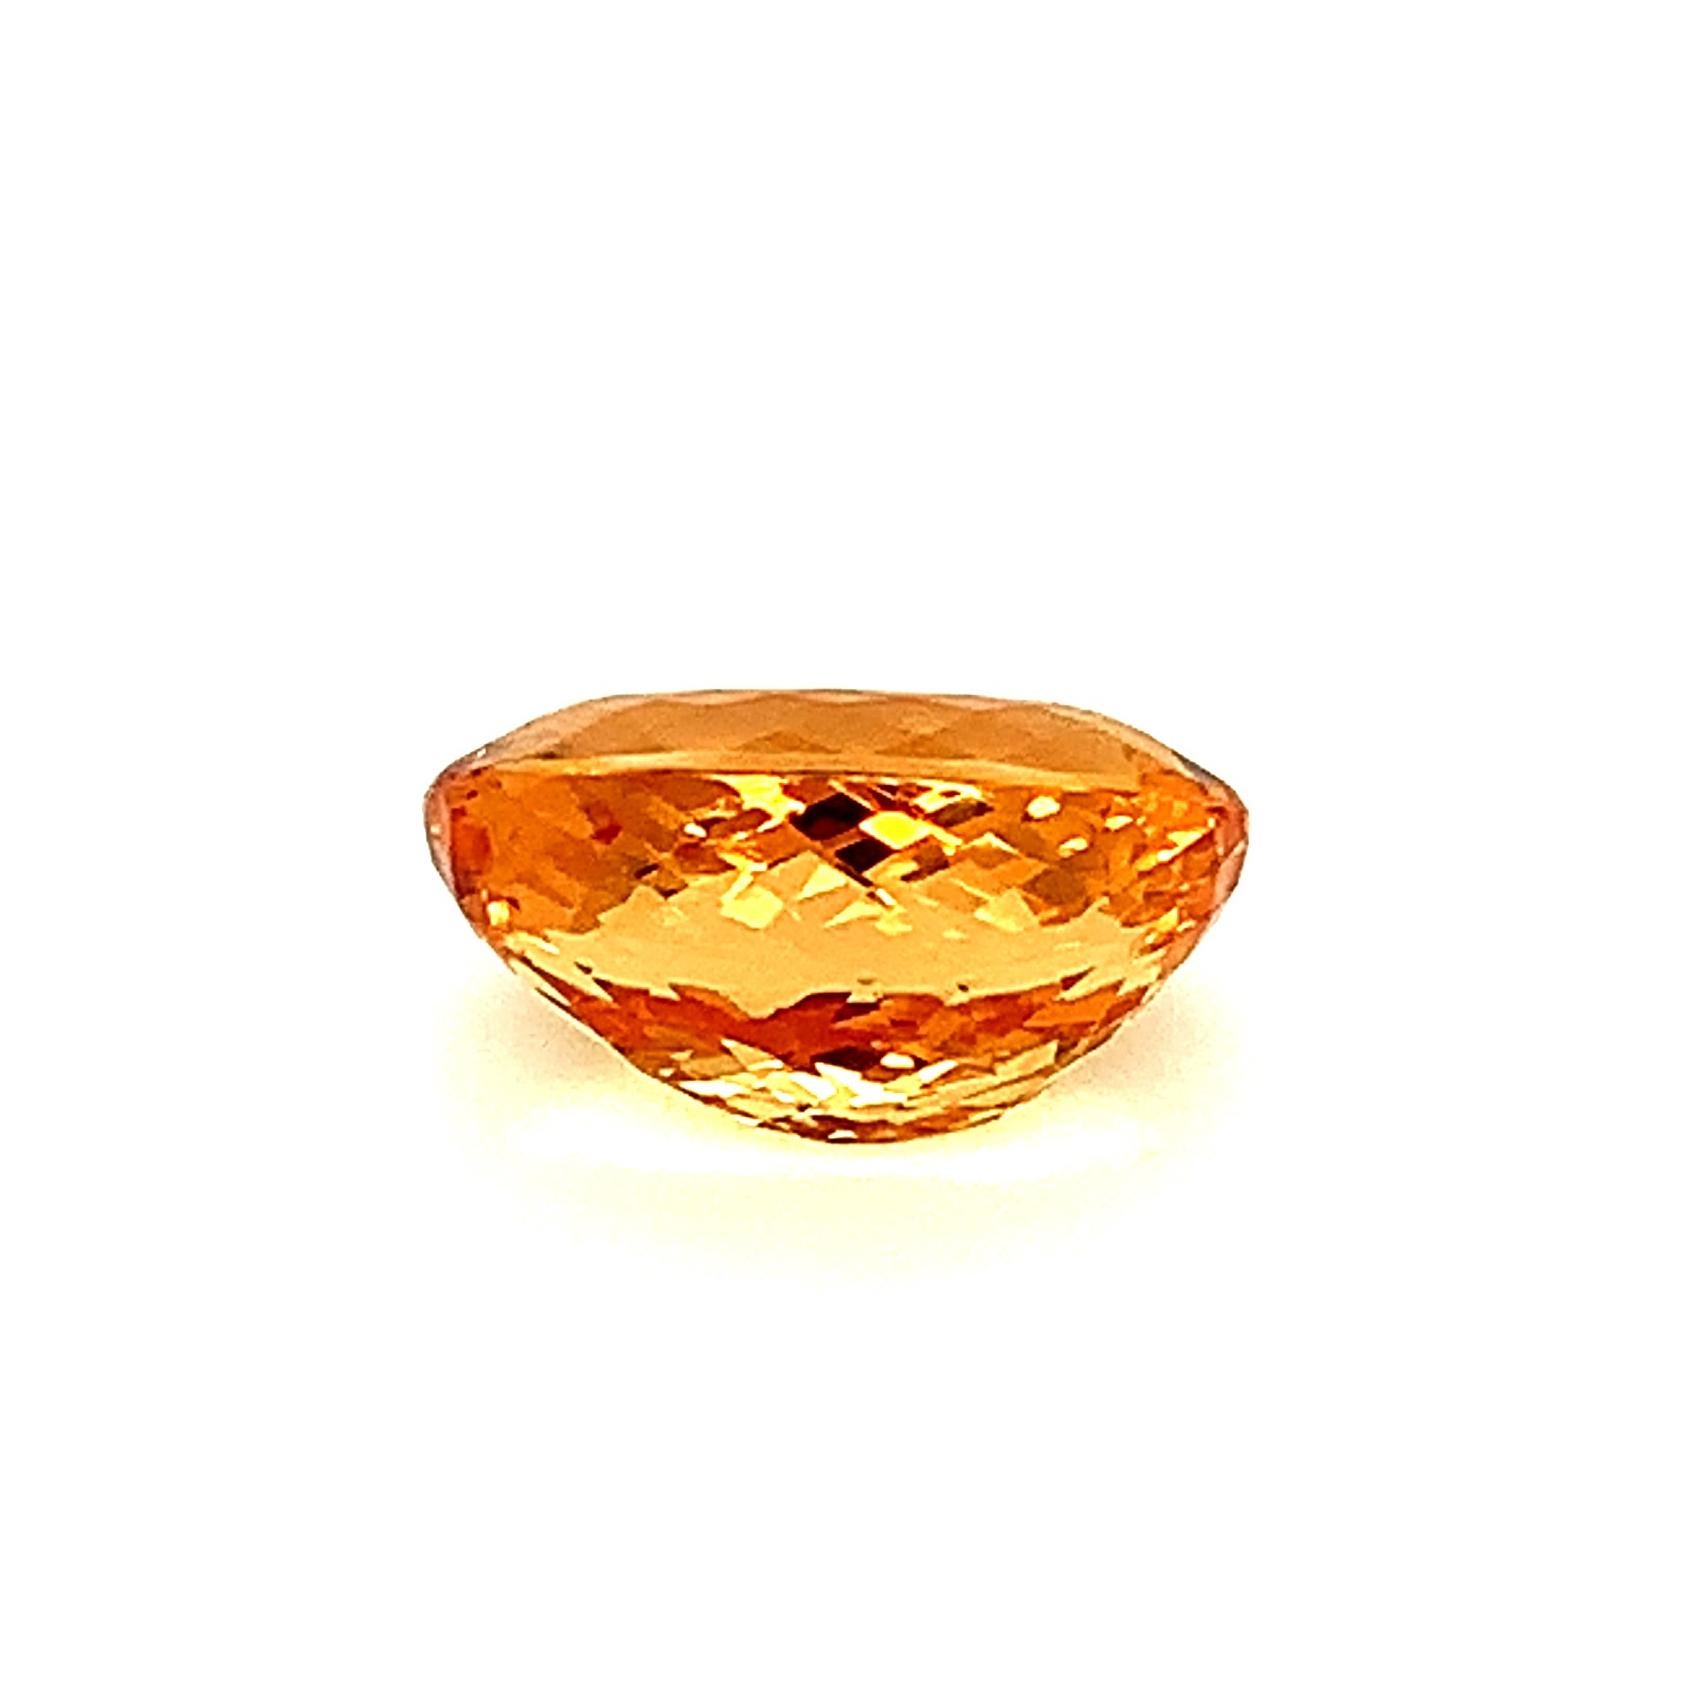 7.16 Carat Precious Imperial Topaz Oval, Unset Loose Gemstone For Sale 1